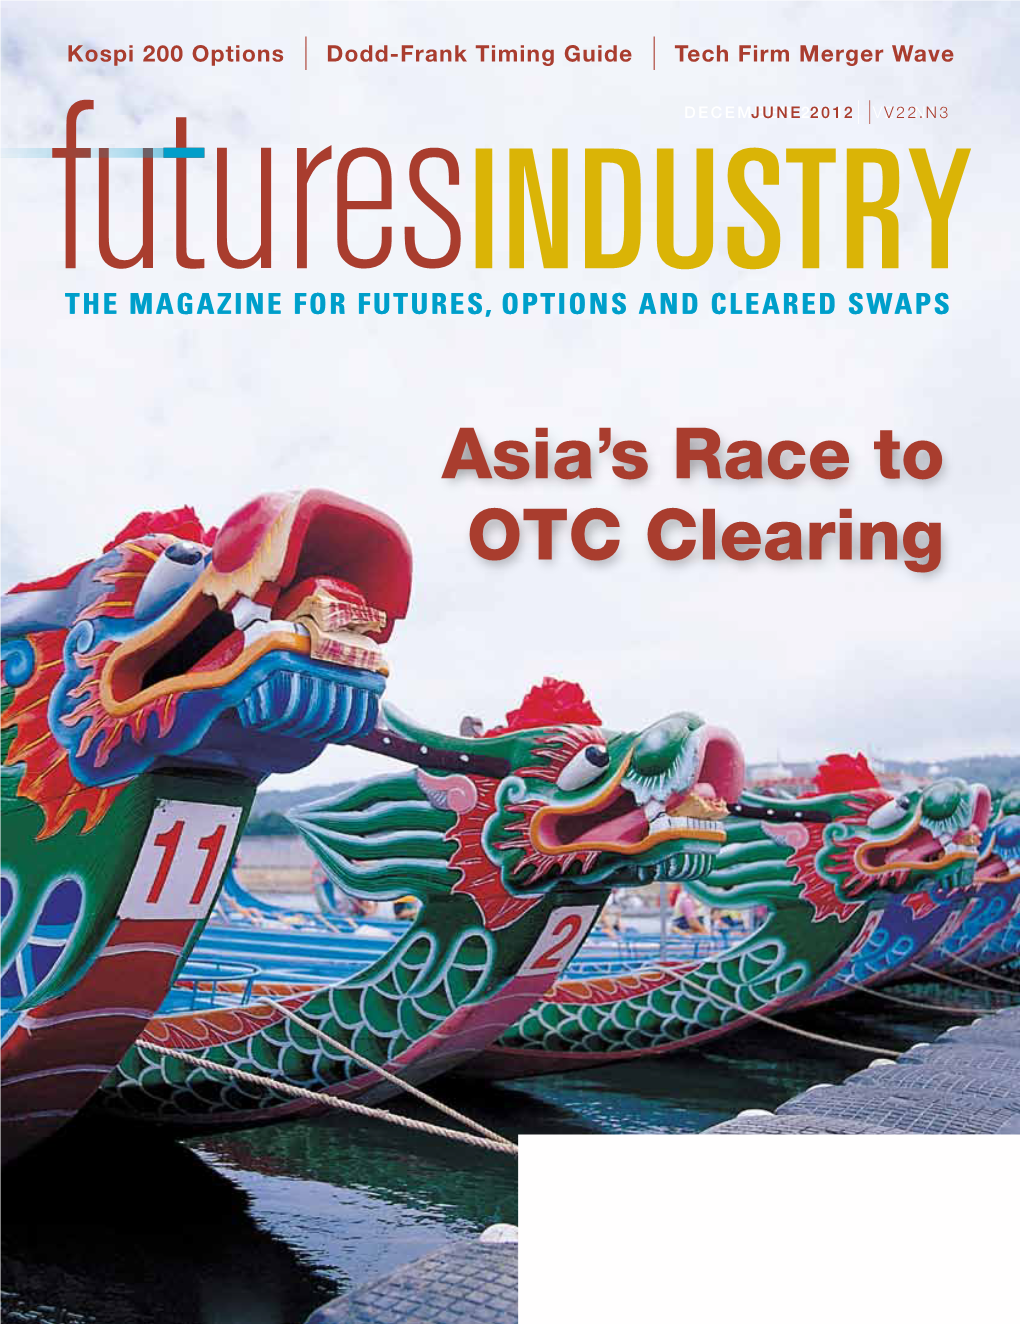 Asia's Race to OTC Clearing